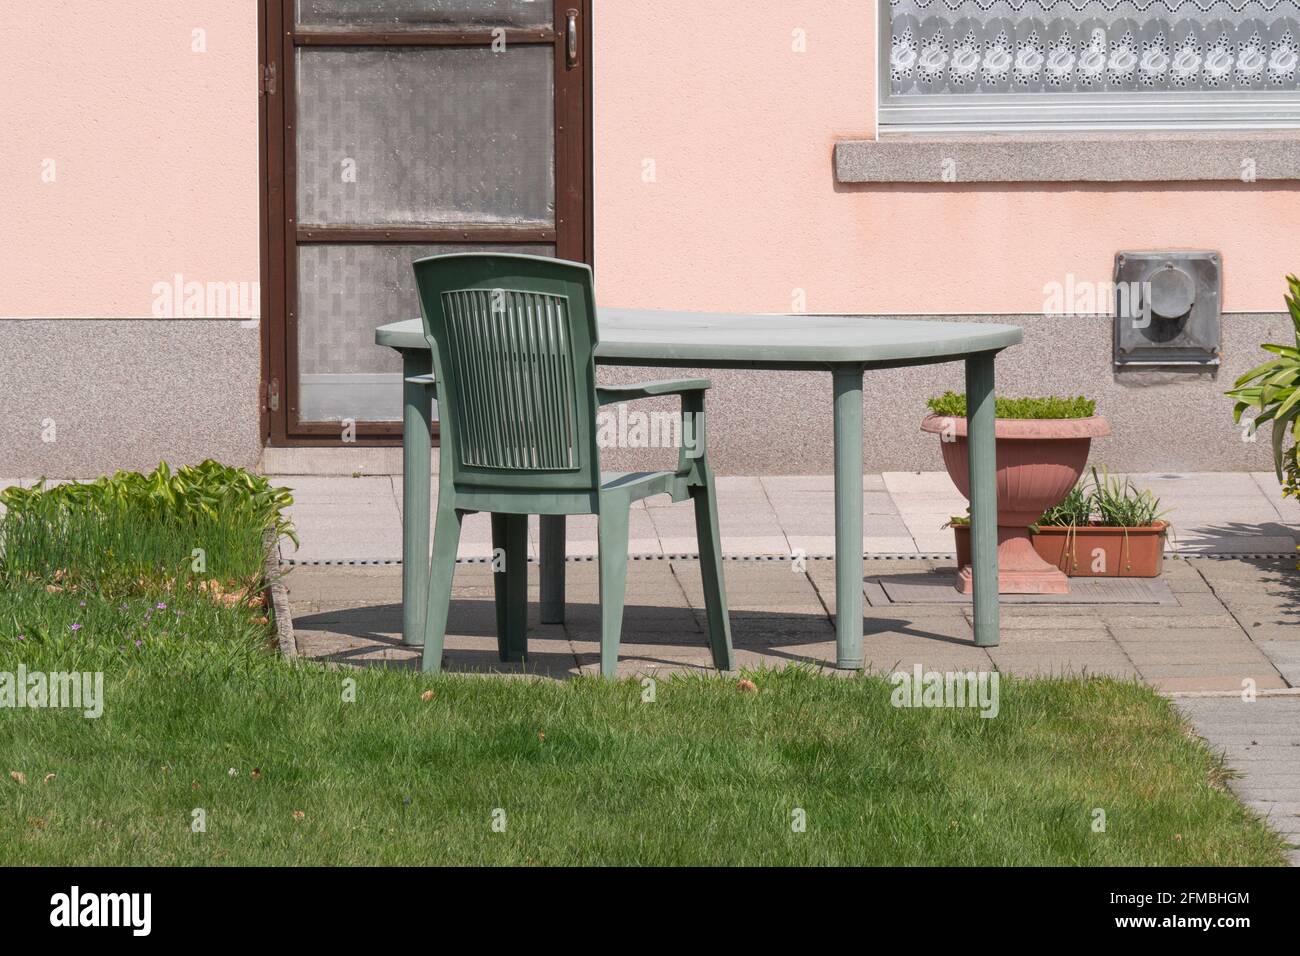 Green plastic garden table and garden chair discolored by the sun Stock Photo